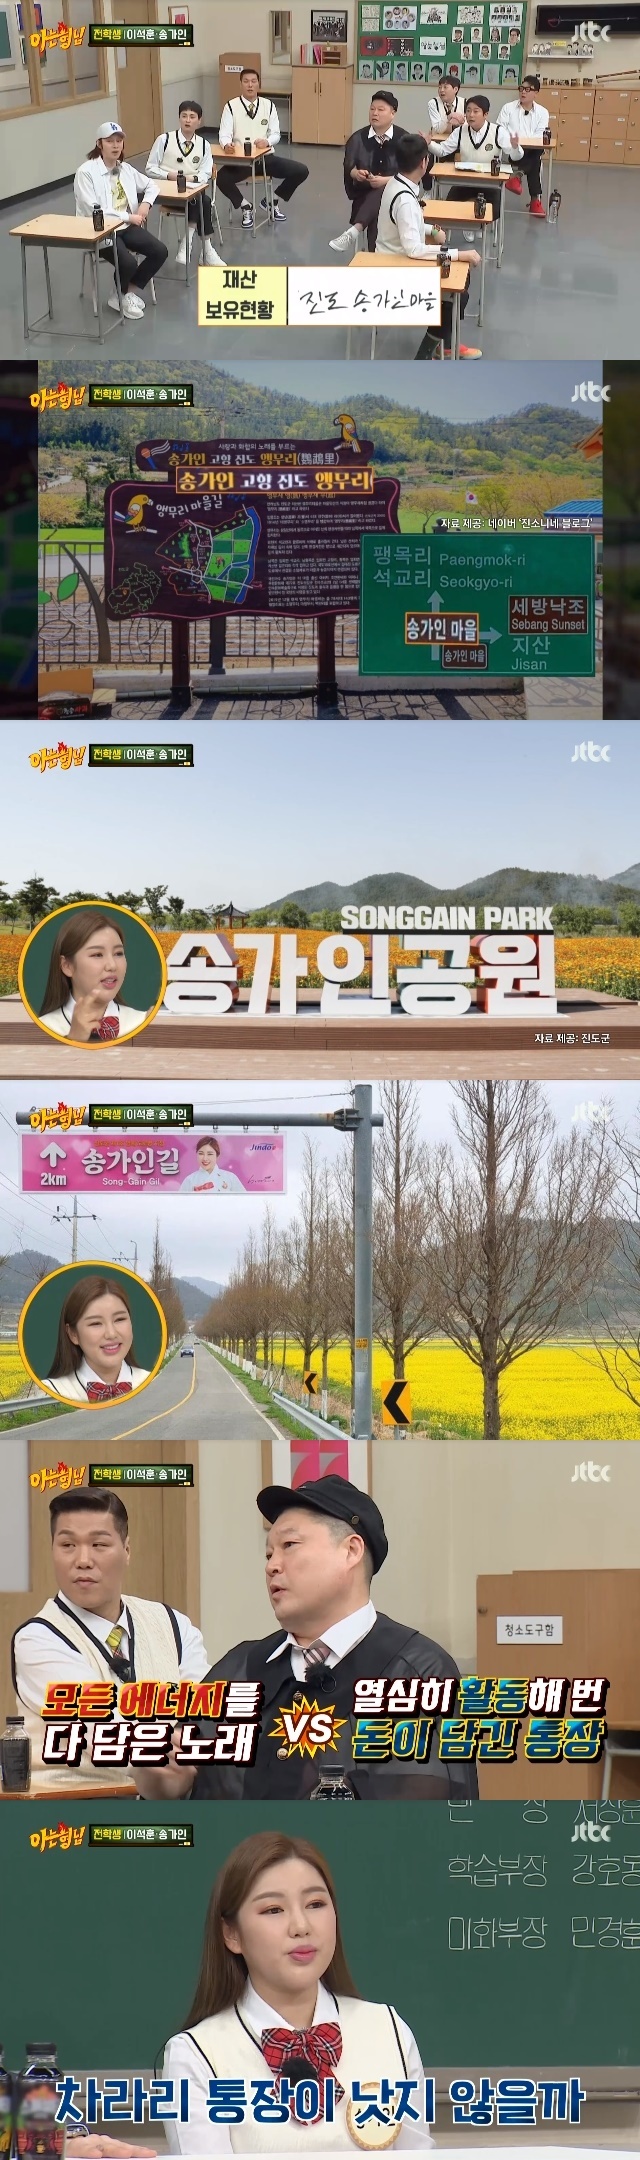 Song Gain boasted of a property that no one could easily have.In the 328th JTBC entertainment Knowing Bros (hereinafter referred to as Knowing Bros) broadcast on April 16, singers Song Gain and Lee Seok Hoon, who are in charge of legends of each genre, transferred to their brothers school.On this day, Lee Soo-geun said in Song Gains introduction, We have some property, but Gains property can not win.Is Gain all the village? Song Gain said, I gave my name to Song Gain Village. He replied, Its not like that. Its only a name.On the way, Song Gain Park was also created and the sign was attached to Song Gain Road. I watched it on TV, like great people, I visited my birthplace and the tourists were huge, said Seo Jang-hoon instead.Song Gain said, I came to see my house. I was surprised to hear that 2,000 tourists a day before Corona 19 visited.Asked if he would be paid for admission, Song Gain said: No, its free. Its a tourist course. There was only rice fields in front, but there was a cafe.My brothers admired Song Gains good influence, which helped the local economy, but they guessed that the family will be hard.My dad was a little hard, but now hes taking pictures, too, and hes drinking like a friend (with tourists), Song Gain said, conveying his father who communicates with his fans.Song Gains fan love was so different. Lee Soo-geun praised his personality, saying, I came after Gain in the car earlier and greeted every one of them.Song Gain said, You should not say hello. Its all seniors. You came from afar to see me, but you have to say hello.Meanwhile married man Lee Seok Hoon delivered family love, who wrote in his own property holdings: Loved wife and son.Lee Seok Hoon prided himself on I have no town like Gain, but I have a son and a loving wife, a driving force.Then he made a song to commemorate his sons 100th day and said, I wanted to celebrate 100 days of baby.I wanted to make a song, made a song, presented it, and donated the proceeds to the hospital where my son was born. At this time, Seo Jang-hoon asked realistically, Is there anything you have in your childs future? Seo Jang-hoon said, It would be better to get your bankbook out when you go to college.It can be better for a bankbook in the childs position.In this situation Kang Ho-dong asked Song Gain: When Gain goes to the future in the future, do you want to give me an energy song, an active passbook?Song Gain said, Is not the bankbook better? Use what you need? But the emotional Kang Ho-dong laughed at the response.In addition, Song Gain boasted its popularity overseas.Song Gain is especially loved by Koreans living in foreign countries due to his longing for Korea. I took a wedding photo several months ago.Only Angelina Jolie (sponsored) and the top Korean stars sponsored me in a very expensive jewelry brand that no one else did. They said it was popular in Asia.I was surprised to hear how I did it, he recalled.Song Gain also had time to unravel the pleasant episodies that were in the performance. Song Gain said, I went to the ceremony.I said, Yes, but I kept throwing money because I did not receive it. I was very sad then. Song Gain spent 30,000 won in the fire.